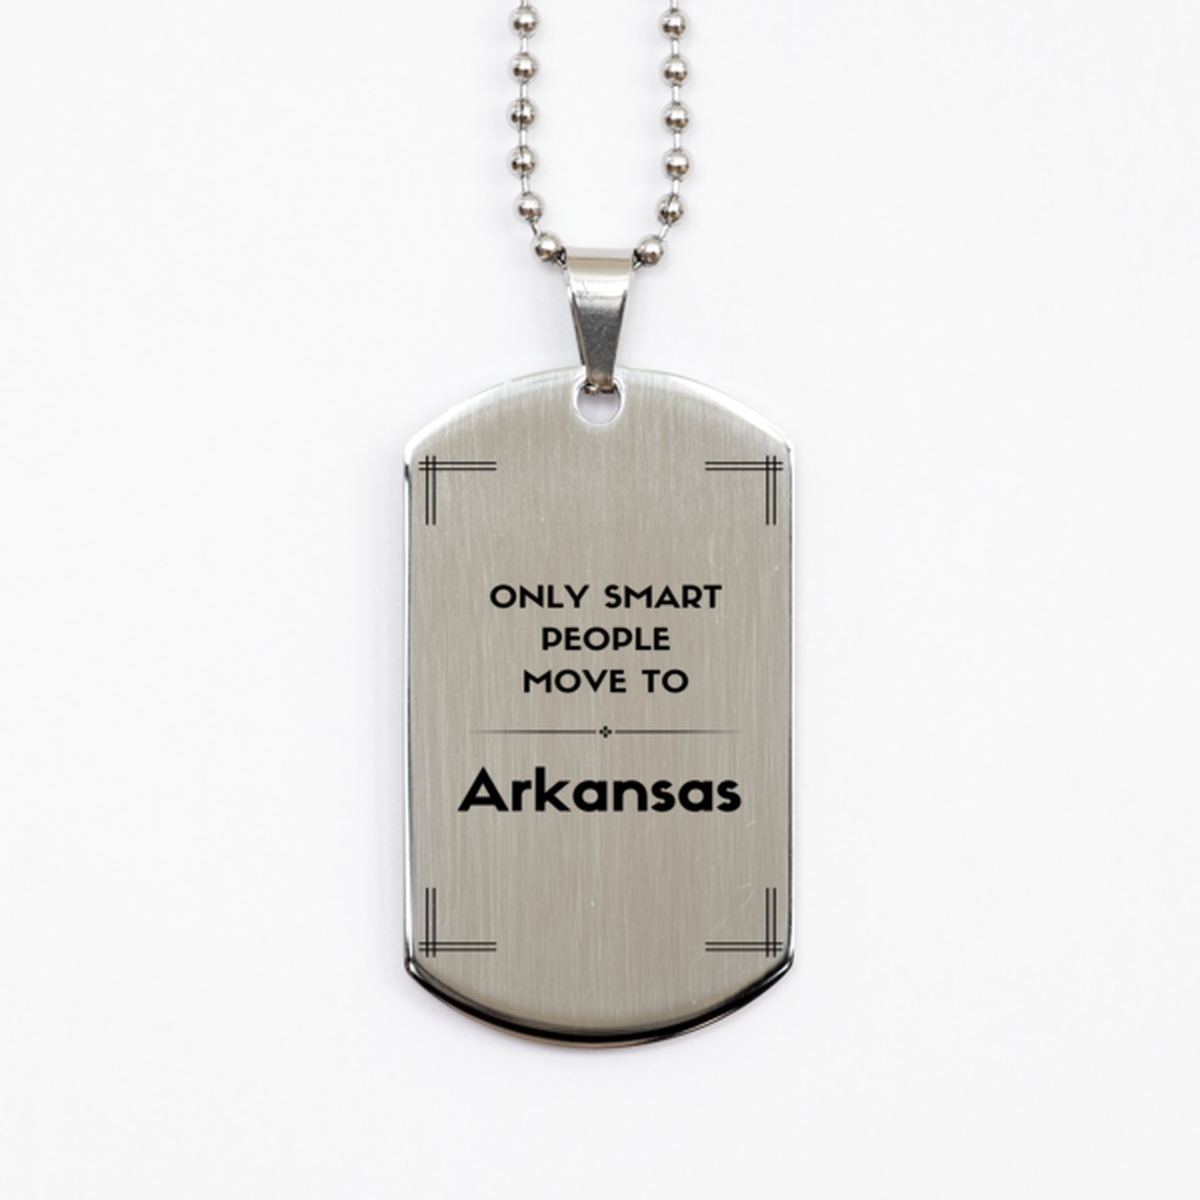 Only smart people move to Arkansas Silver Dog Tag, Gag Gifts For Arkansas, Move to Arkansas Gifts for Friends Coworker Funny Saying Quote